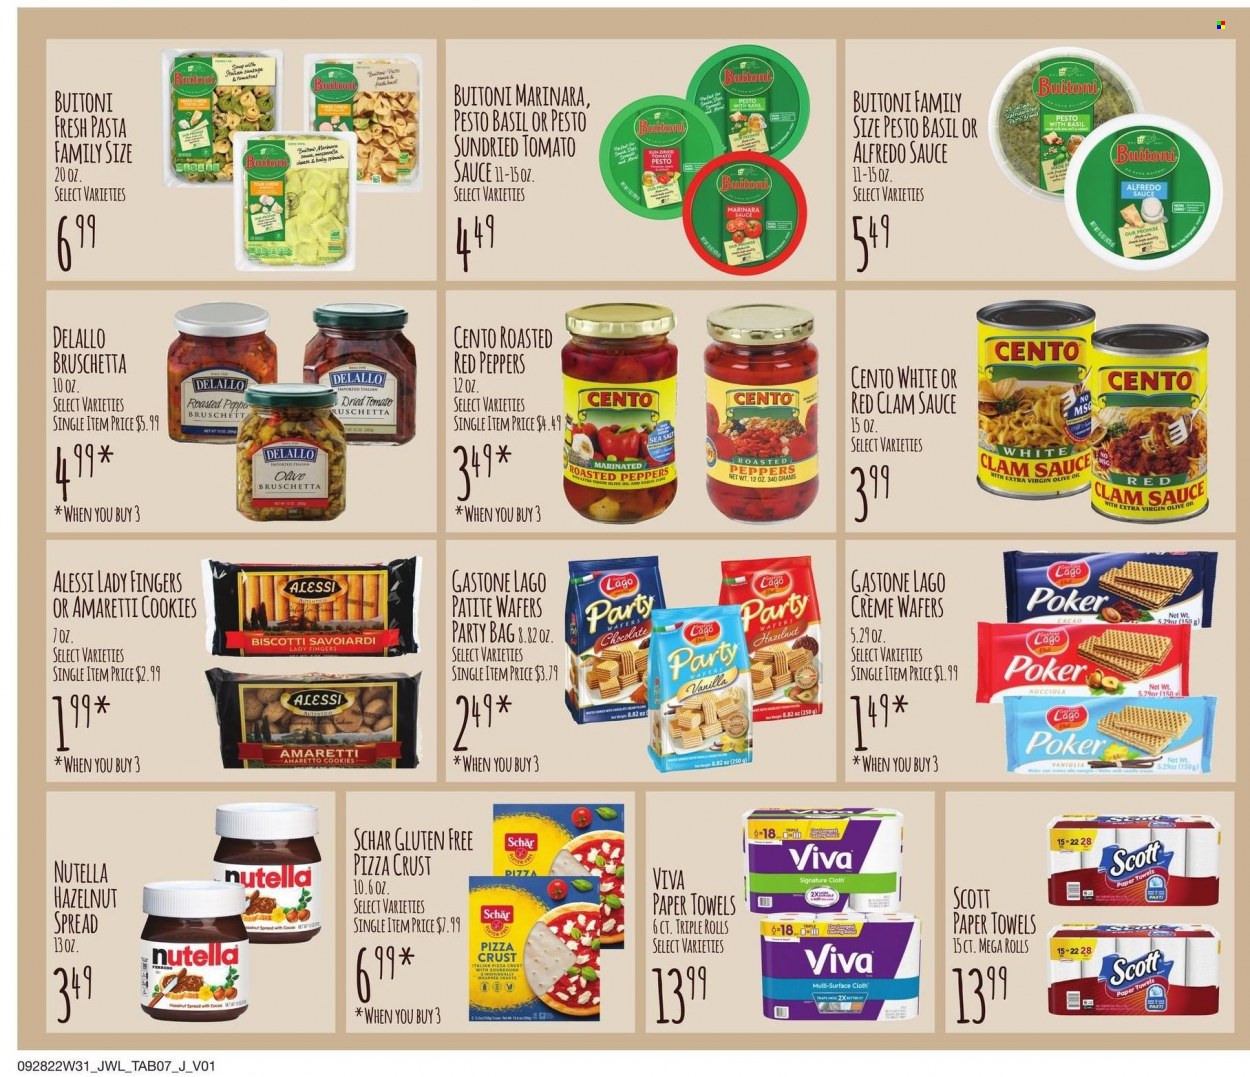 thumbnail - Jewel Osco Flyer - 09/28/2022 - 10/23/2022 - Sales products - peppers, red peppers, clams, pizza, soup, sauce, Alfredo sauce, Buitoni, bruschetta, sausage, Amaretti, biscotti, cookies, lady fingers, wafers, Nutella, chocolate, dried tomatoes, tomato sauce, pepper, pesto, extra virgin olive oil, oil, hazelnut spread, Amaretto, Scott, kitchen towels, paper towels, bag, plate. Page 7.